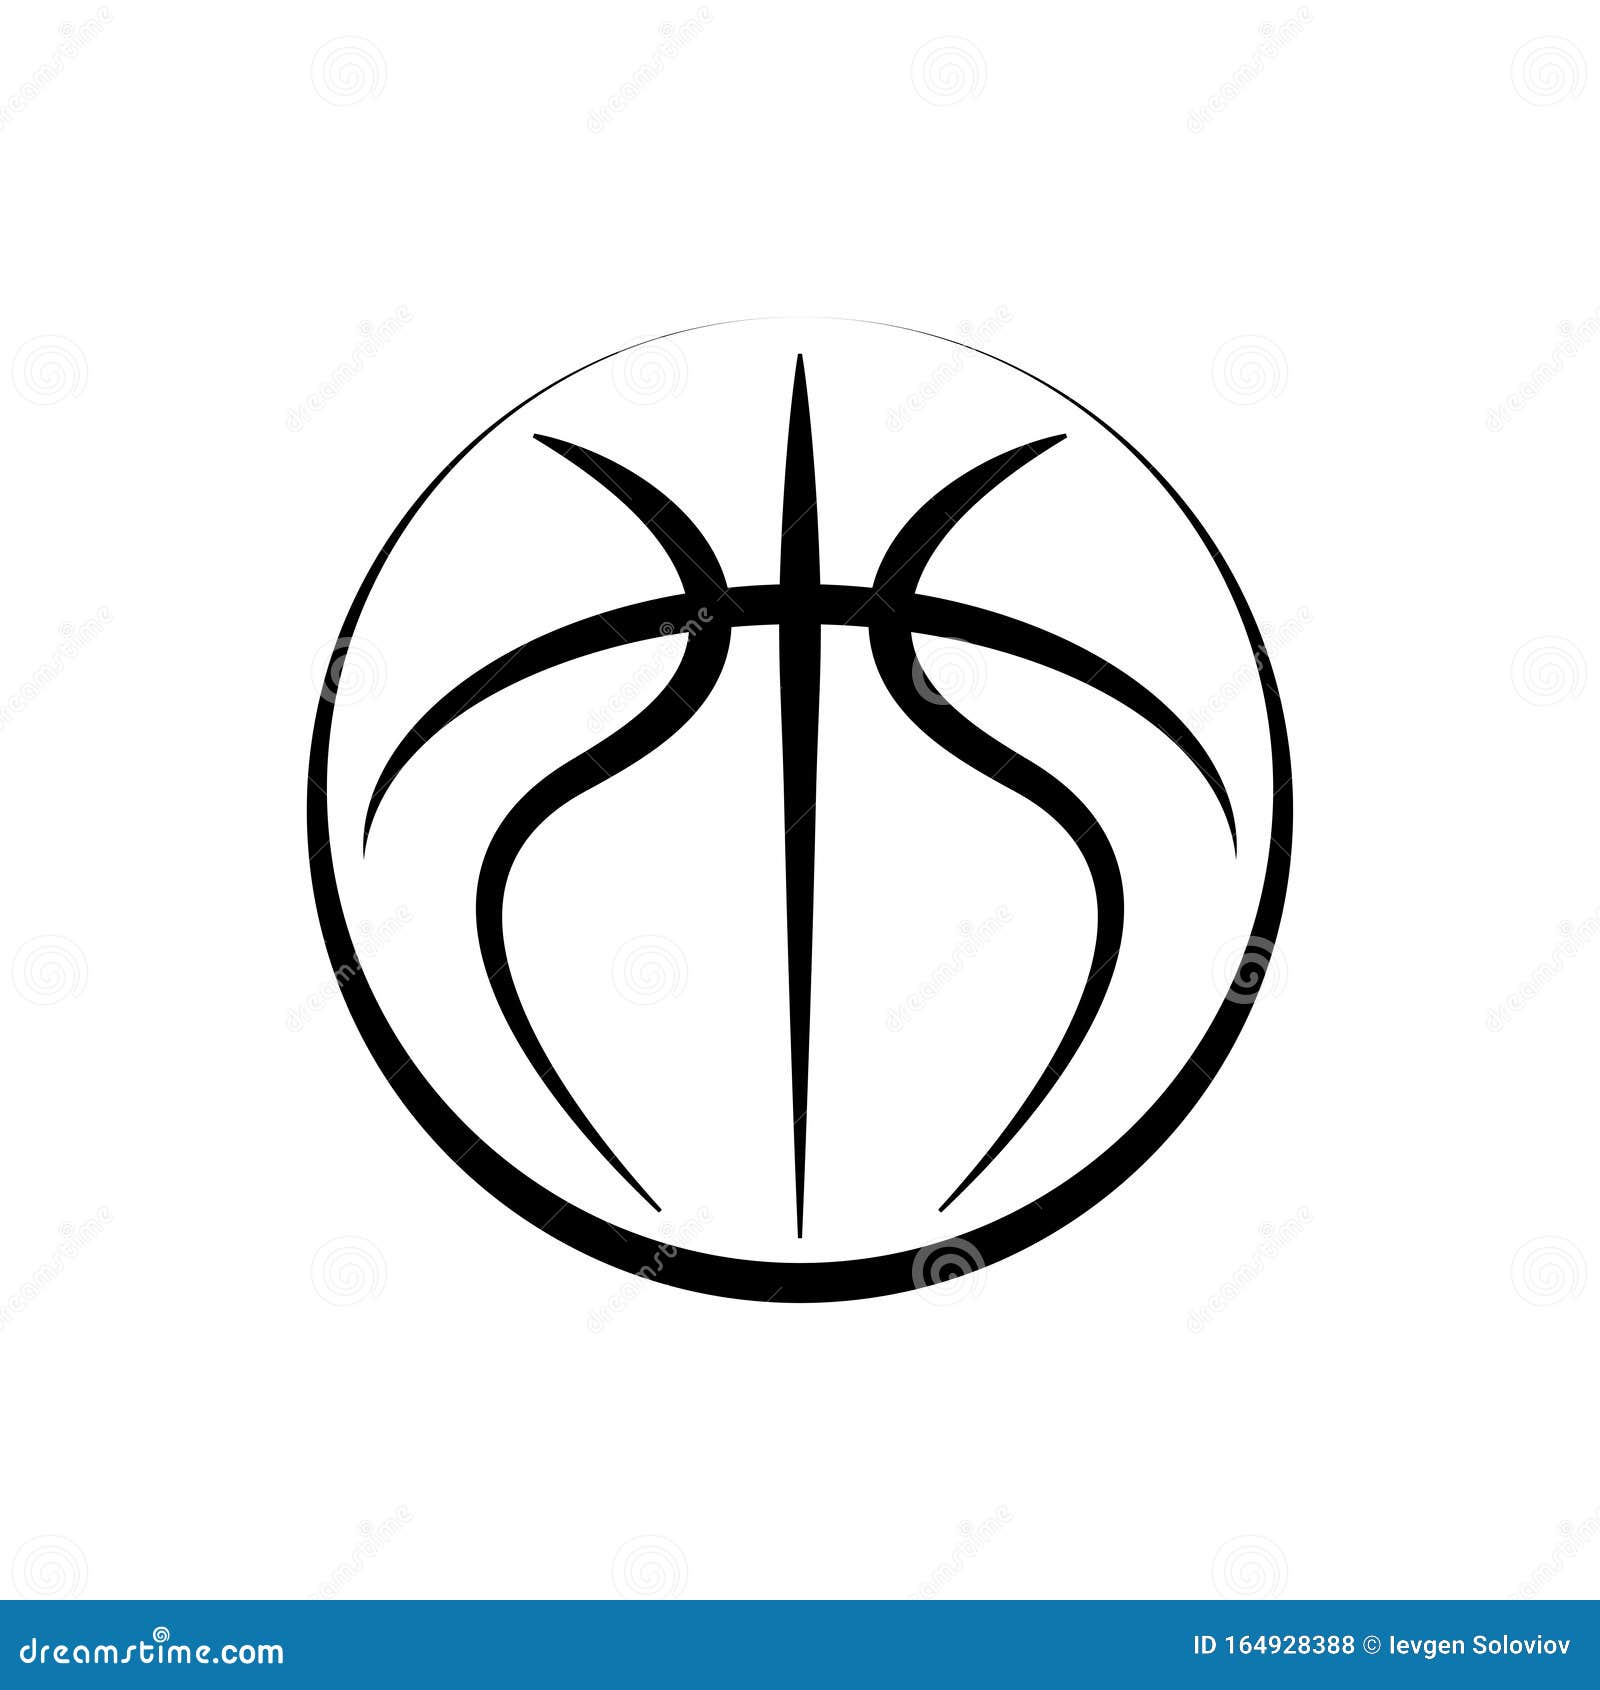 Basketball outline symbol stock vector. Illustration of competition ...